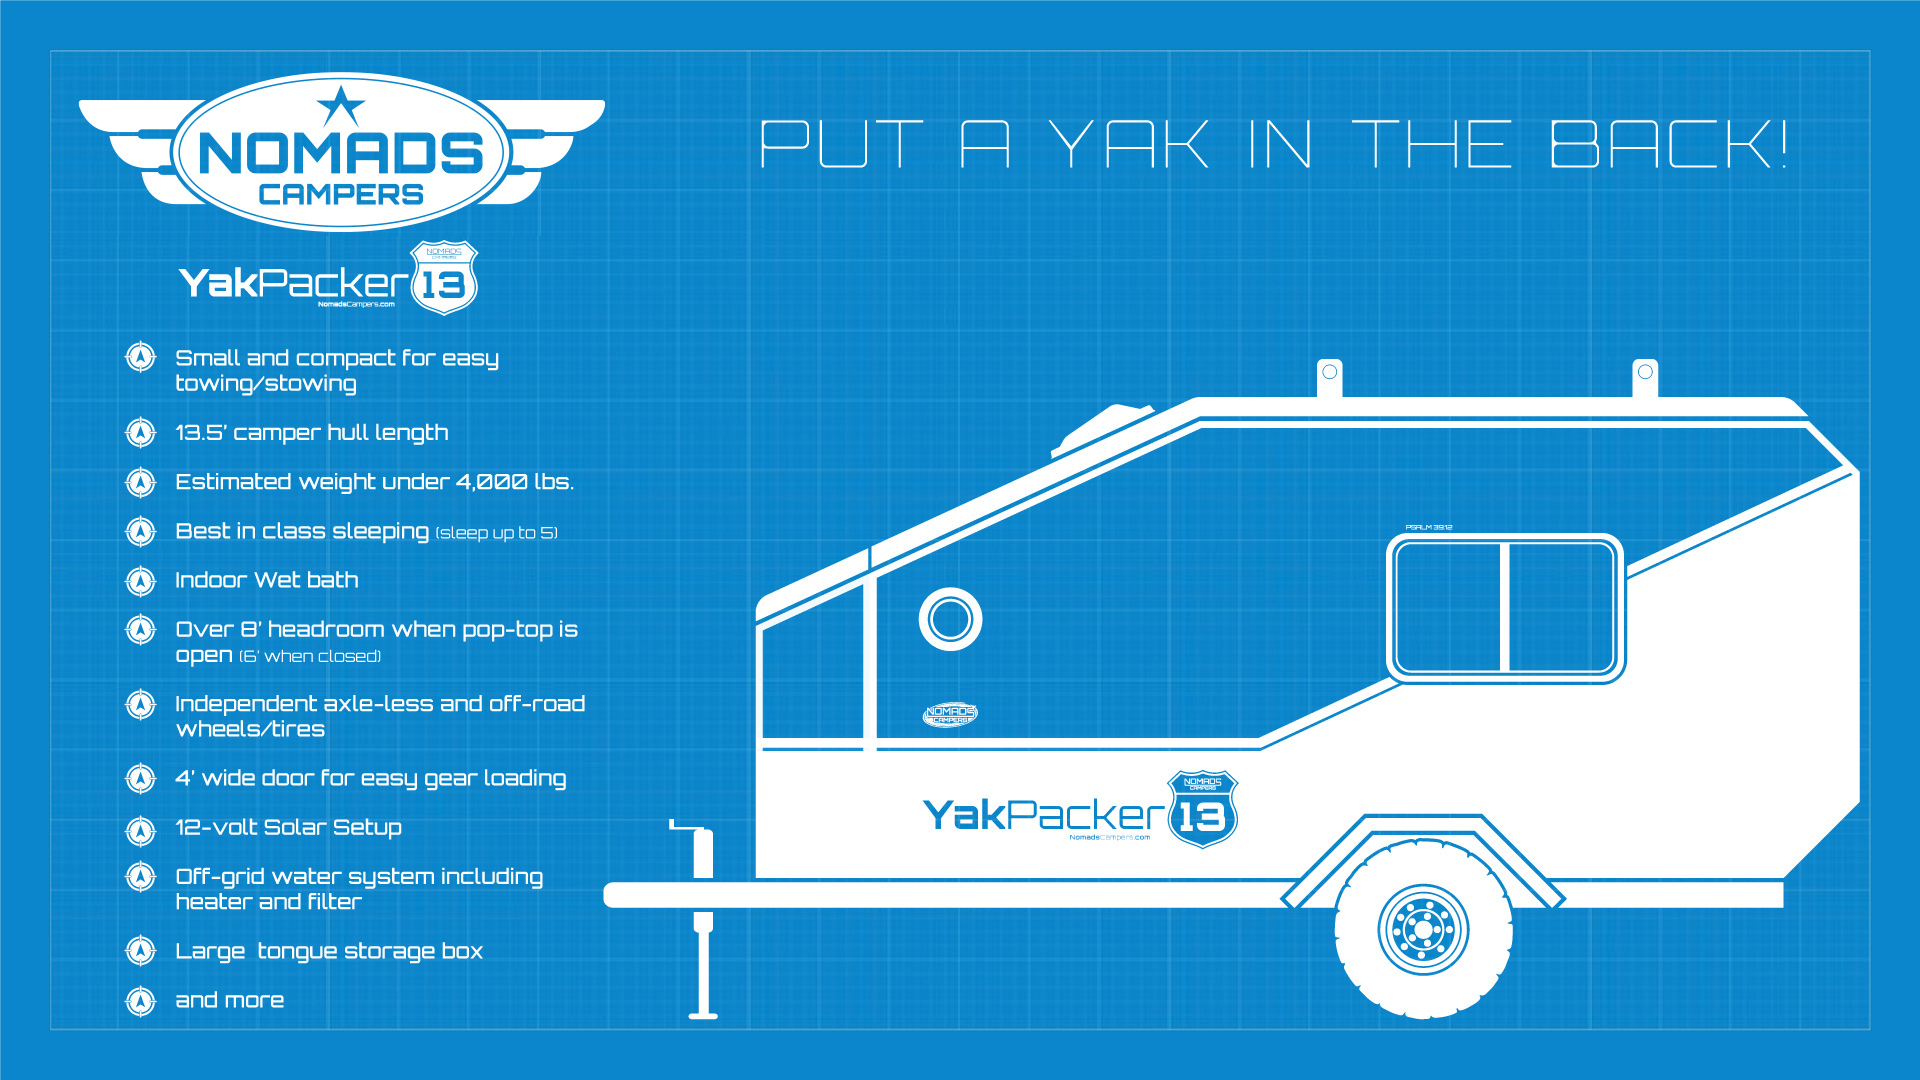 Nomads Campers - Yak Packer 13 - Quick Specs and Stats